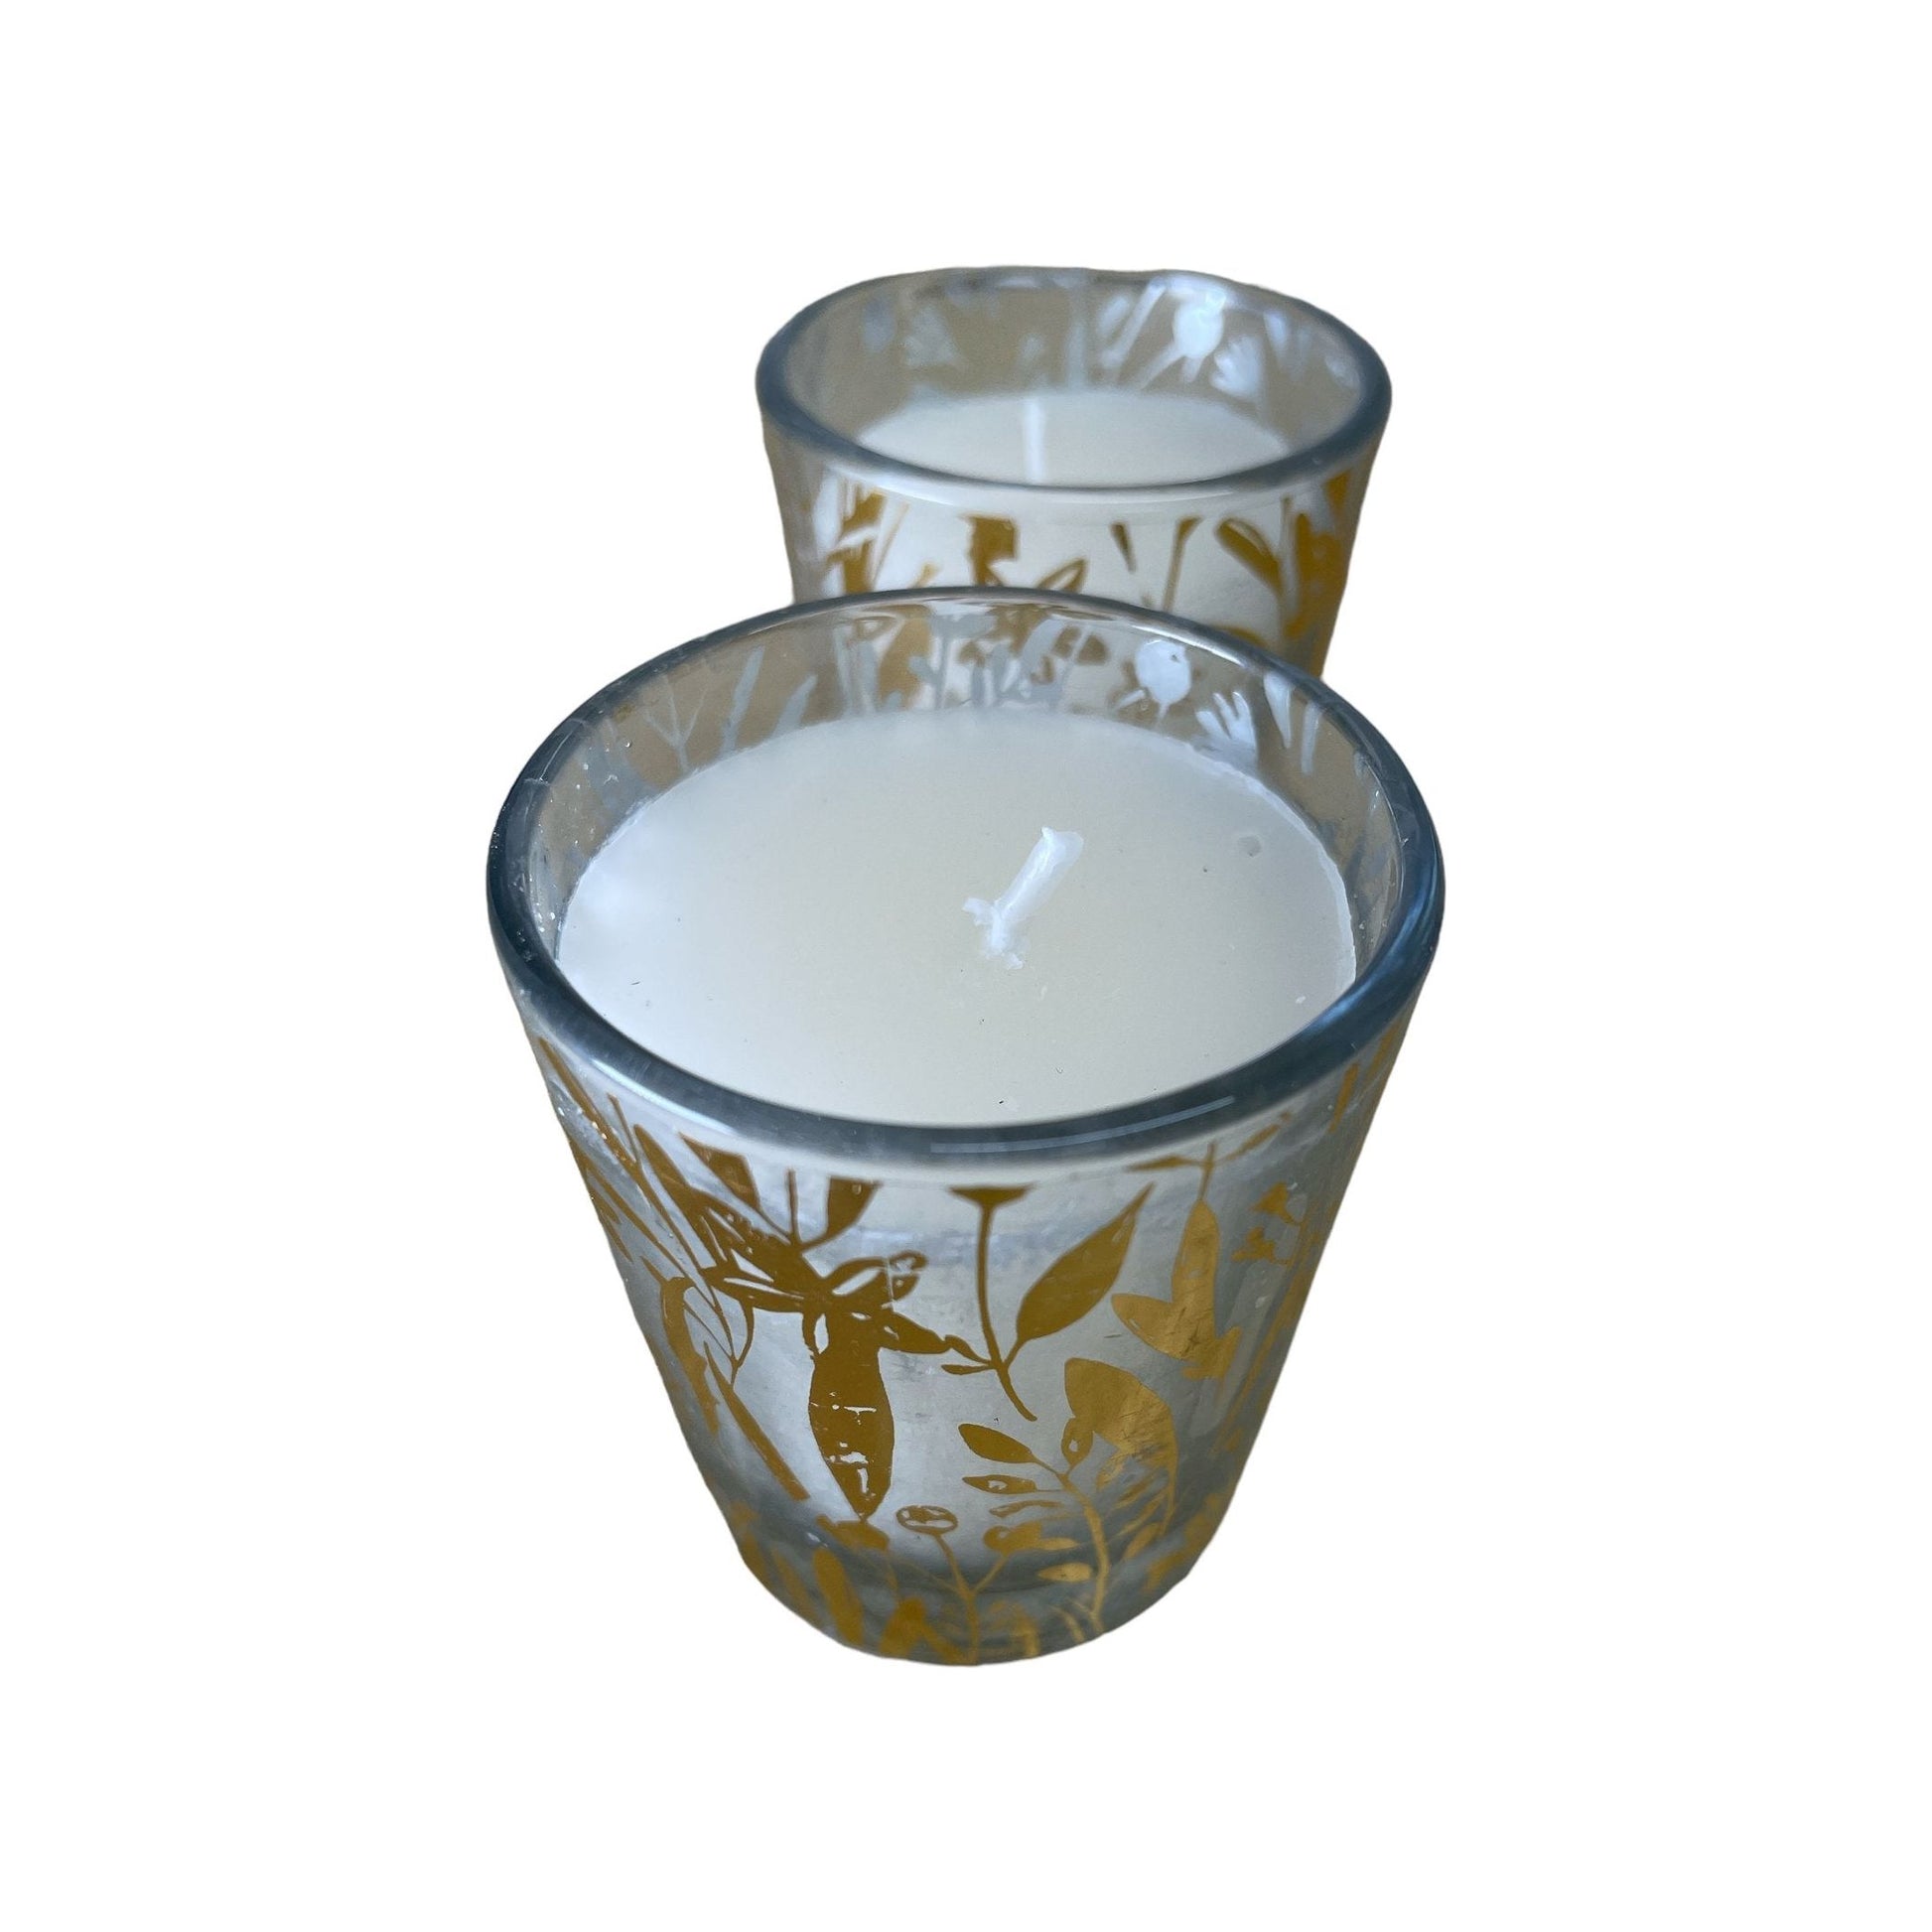 Scented Leaf Votive Candles, Pack of 2 - Ashton and Finch